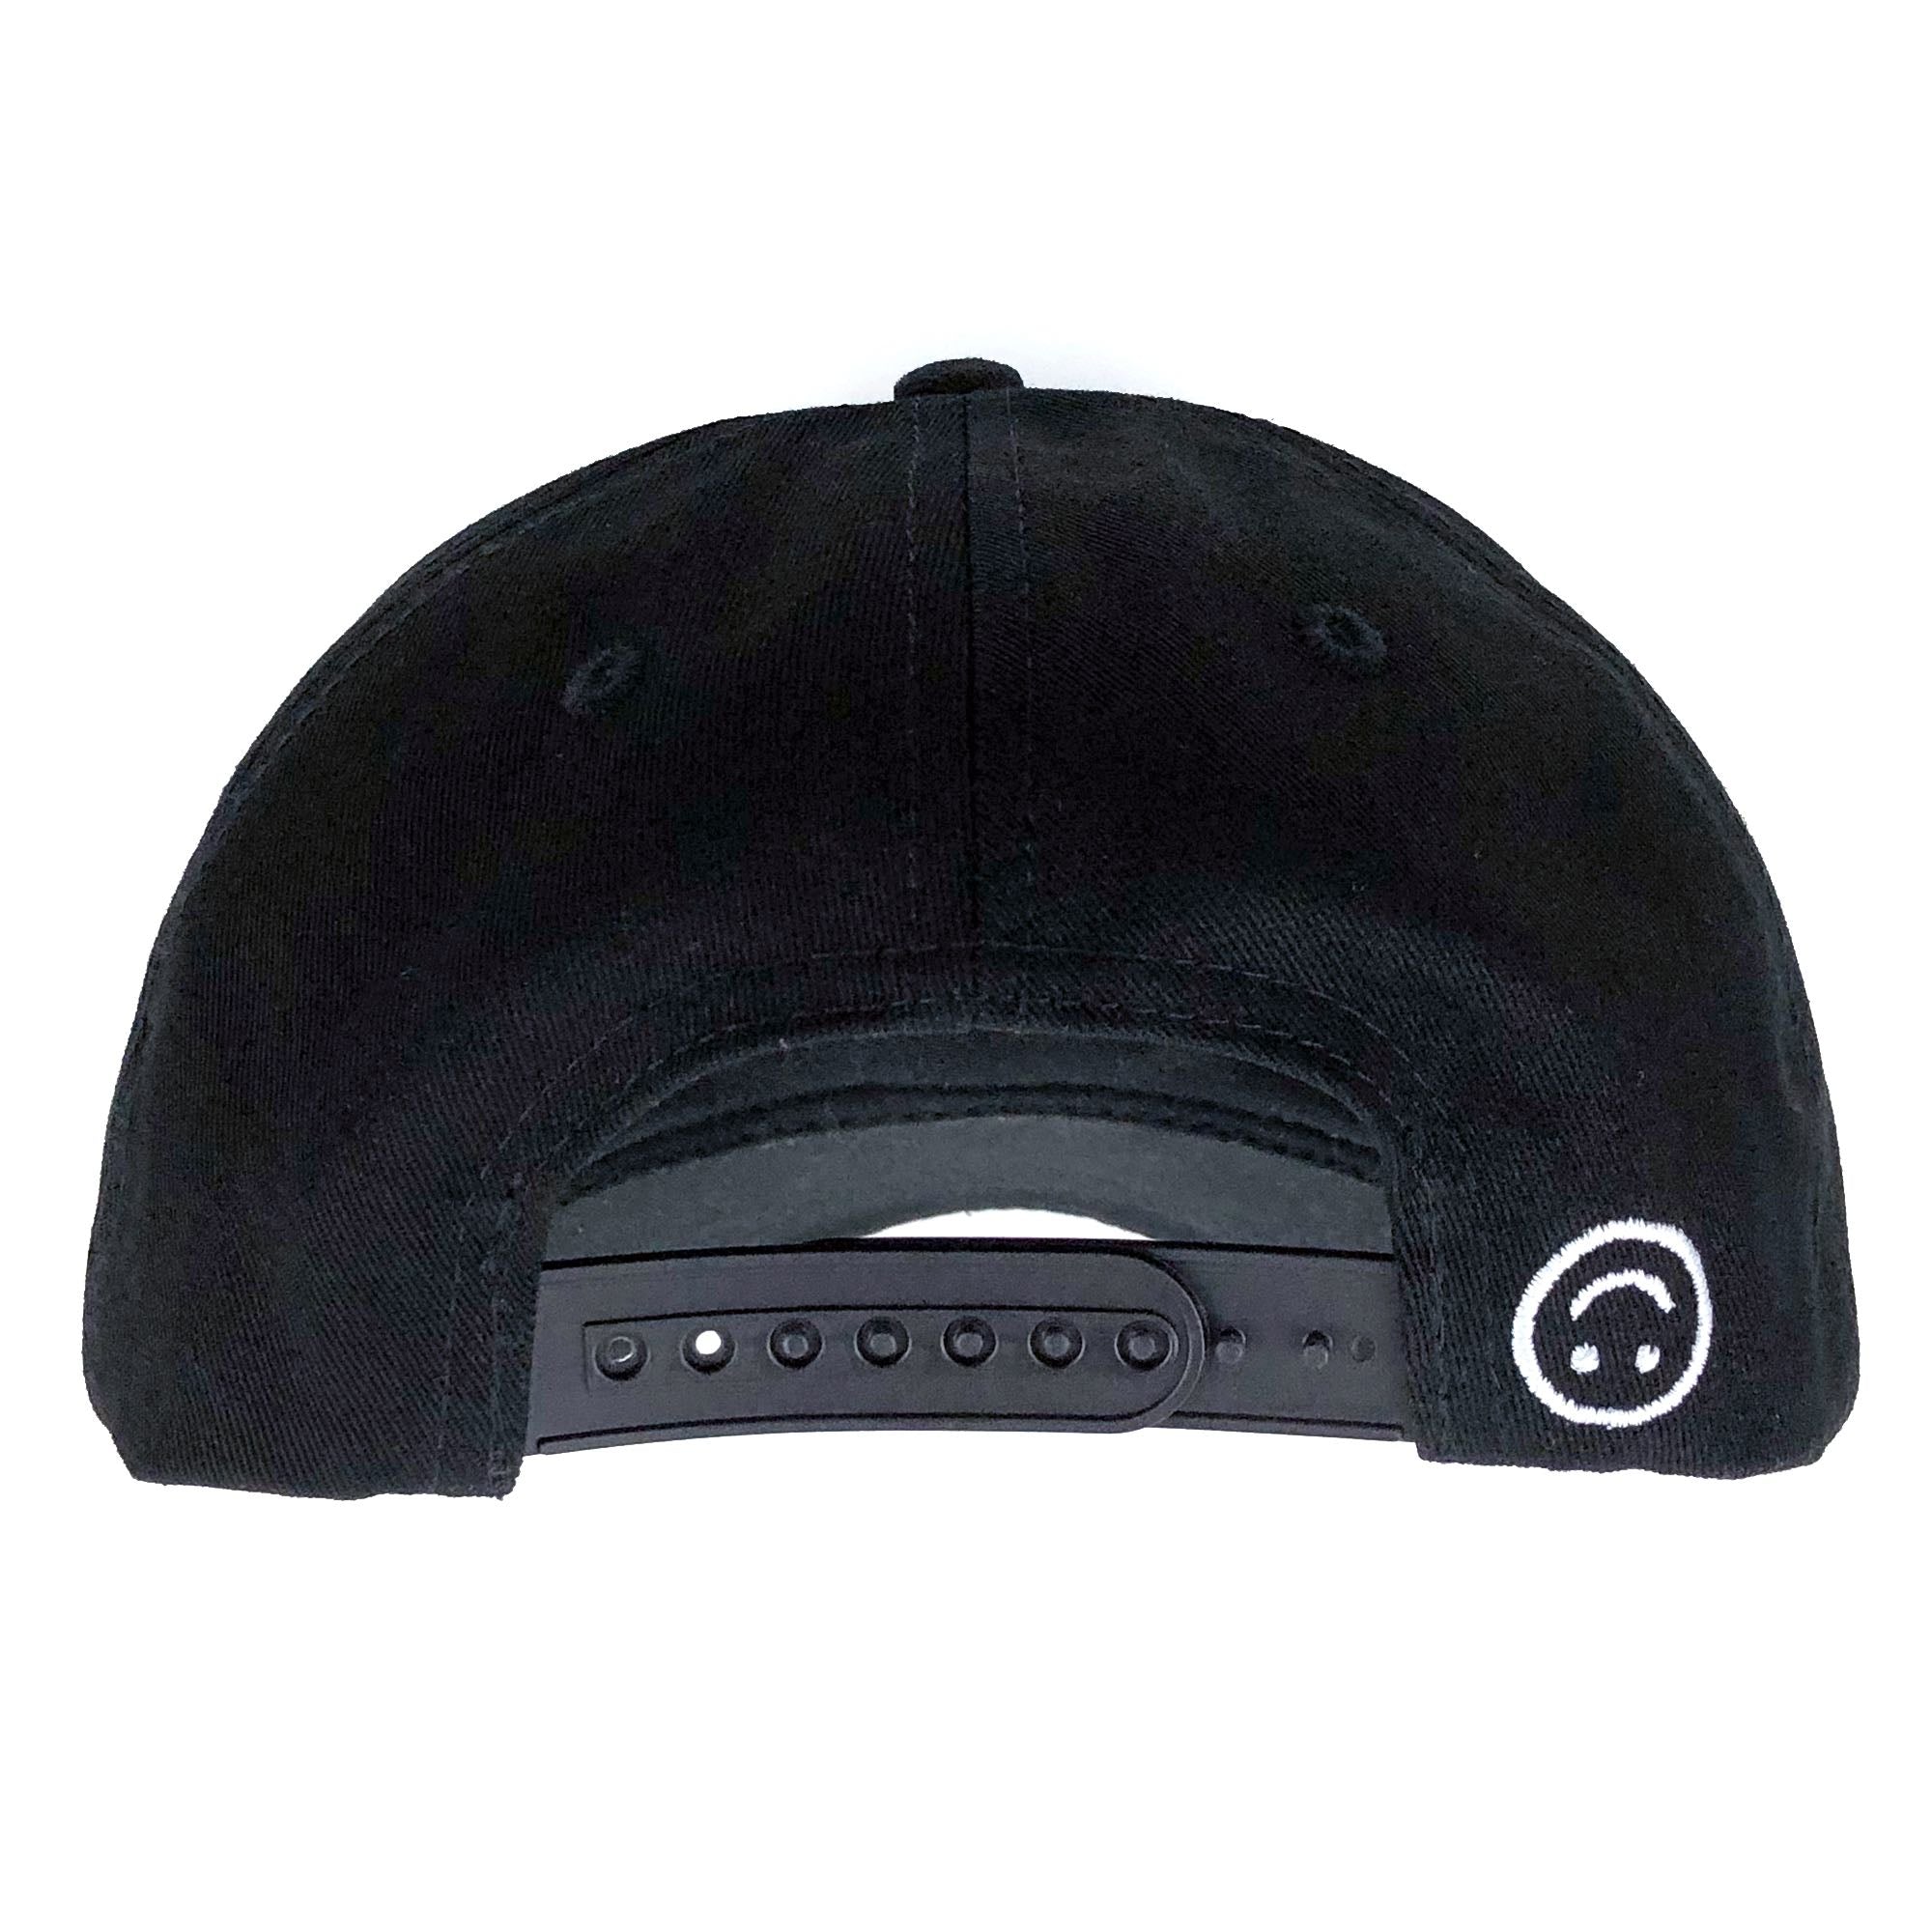 Hats Cap® velcro Caption The letter Customizable - from Upside hat,